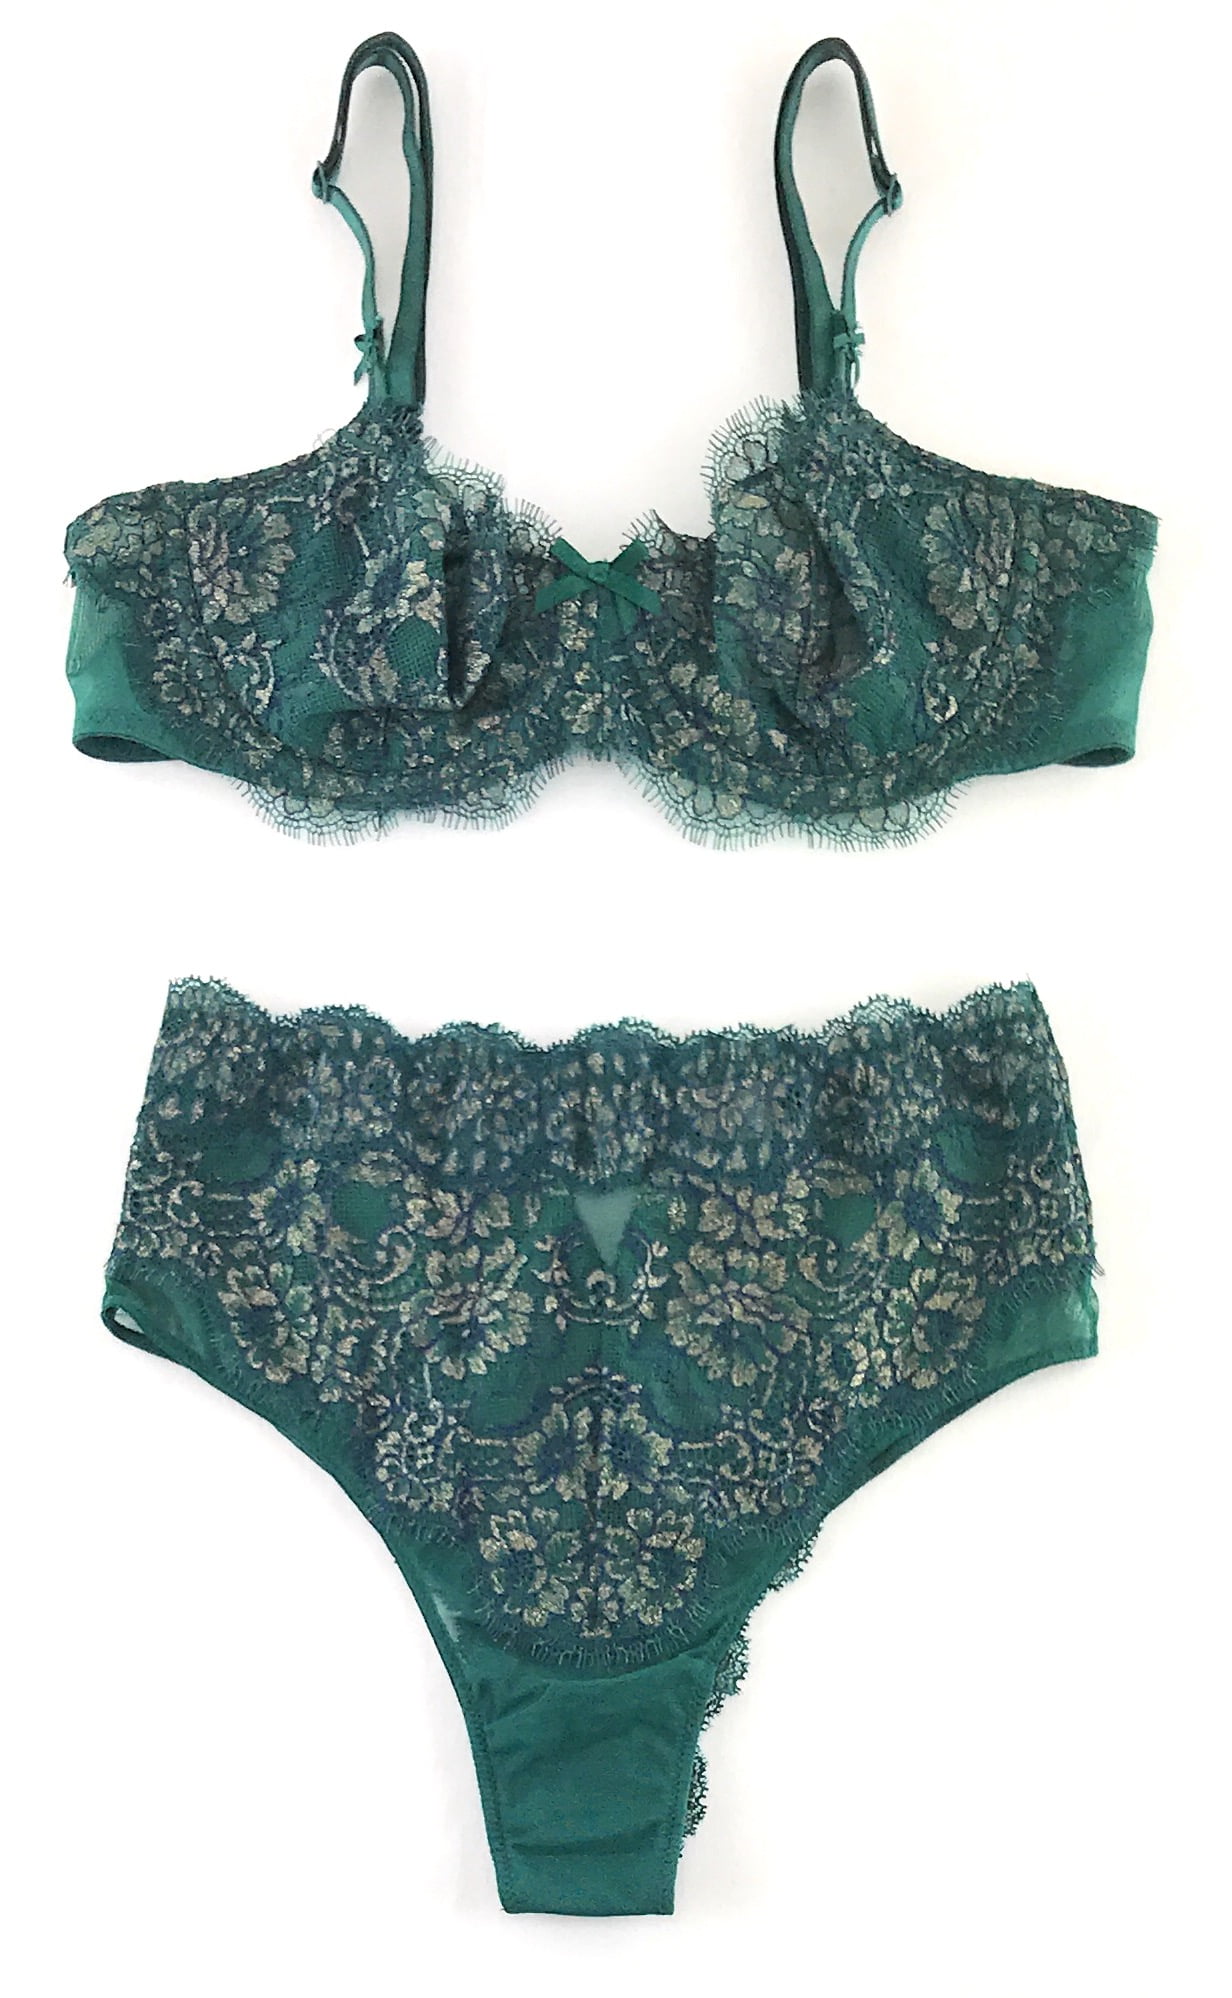 Victoria's Secret Dream Angels Wicked Uplift Bra and High Waist Cheeky  Panty Set